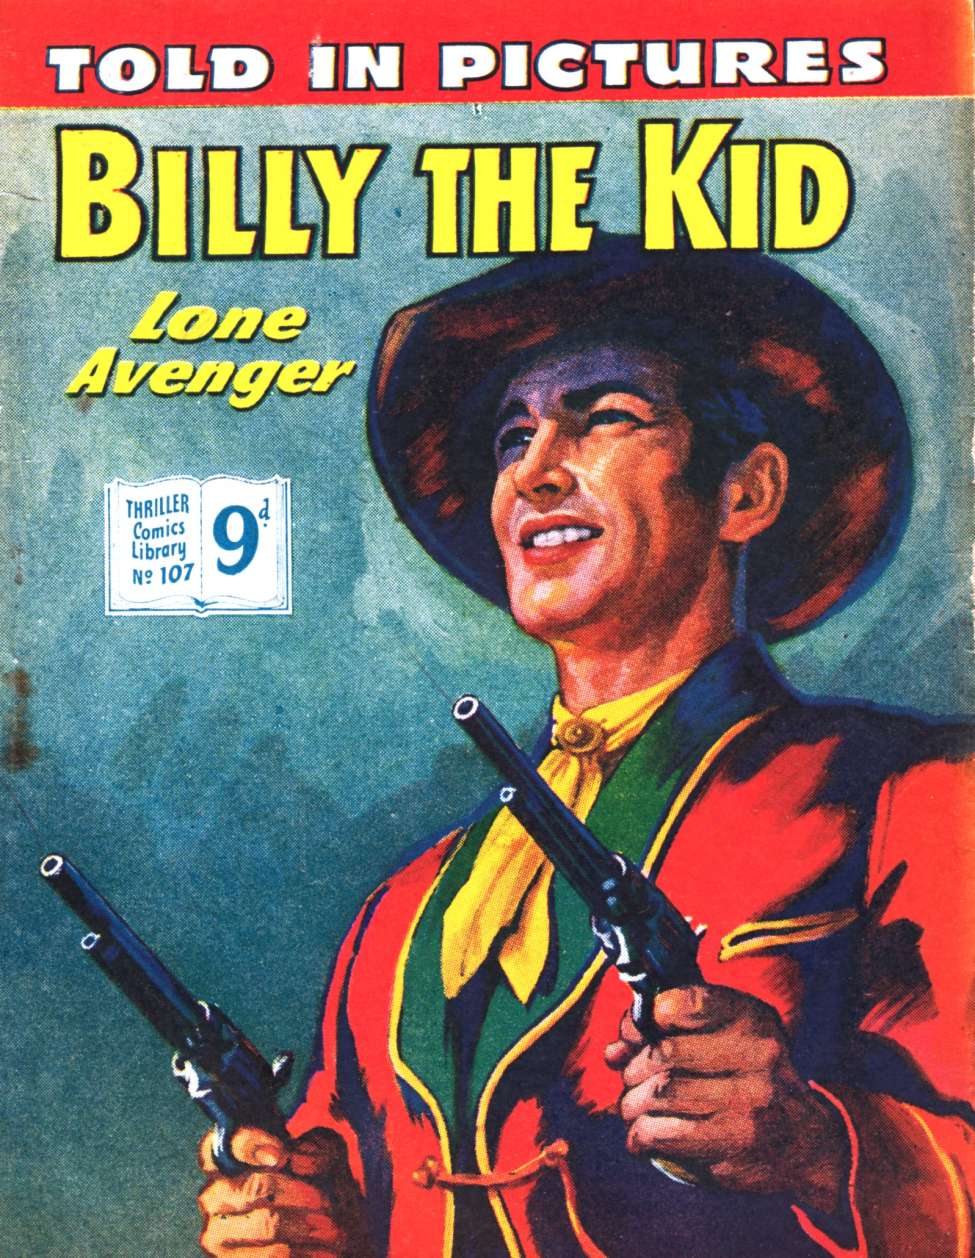 Book Cover For Thriller Comics Library 107 - Billy the Kid Lone Avenger